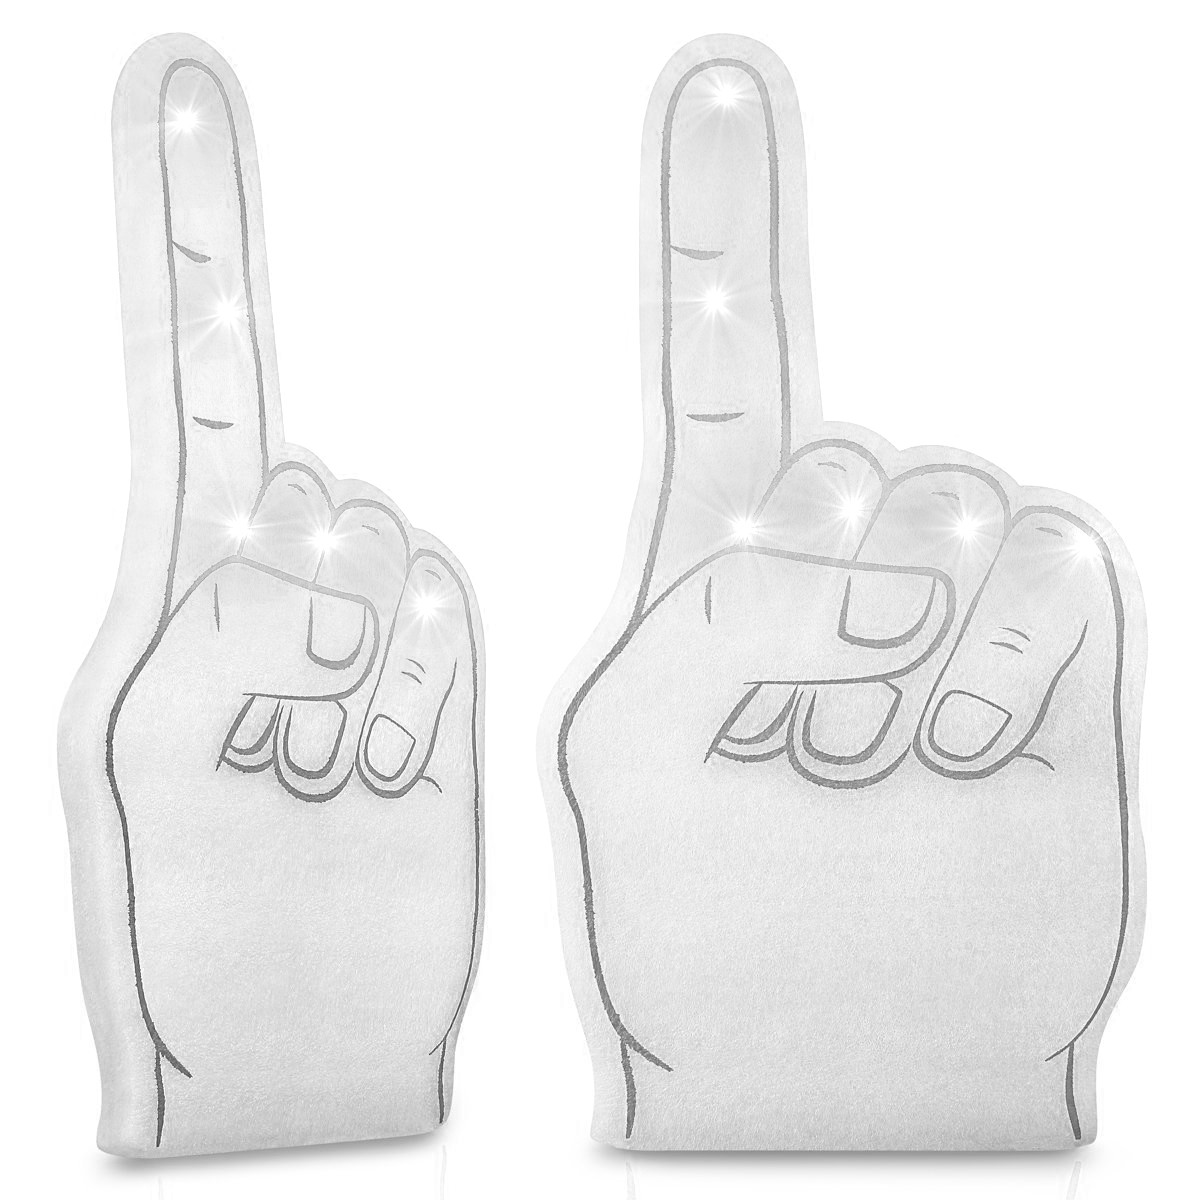 Number One Foam Light Up Finger White All Products 3